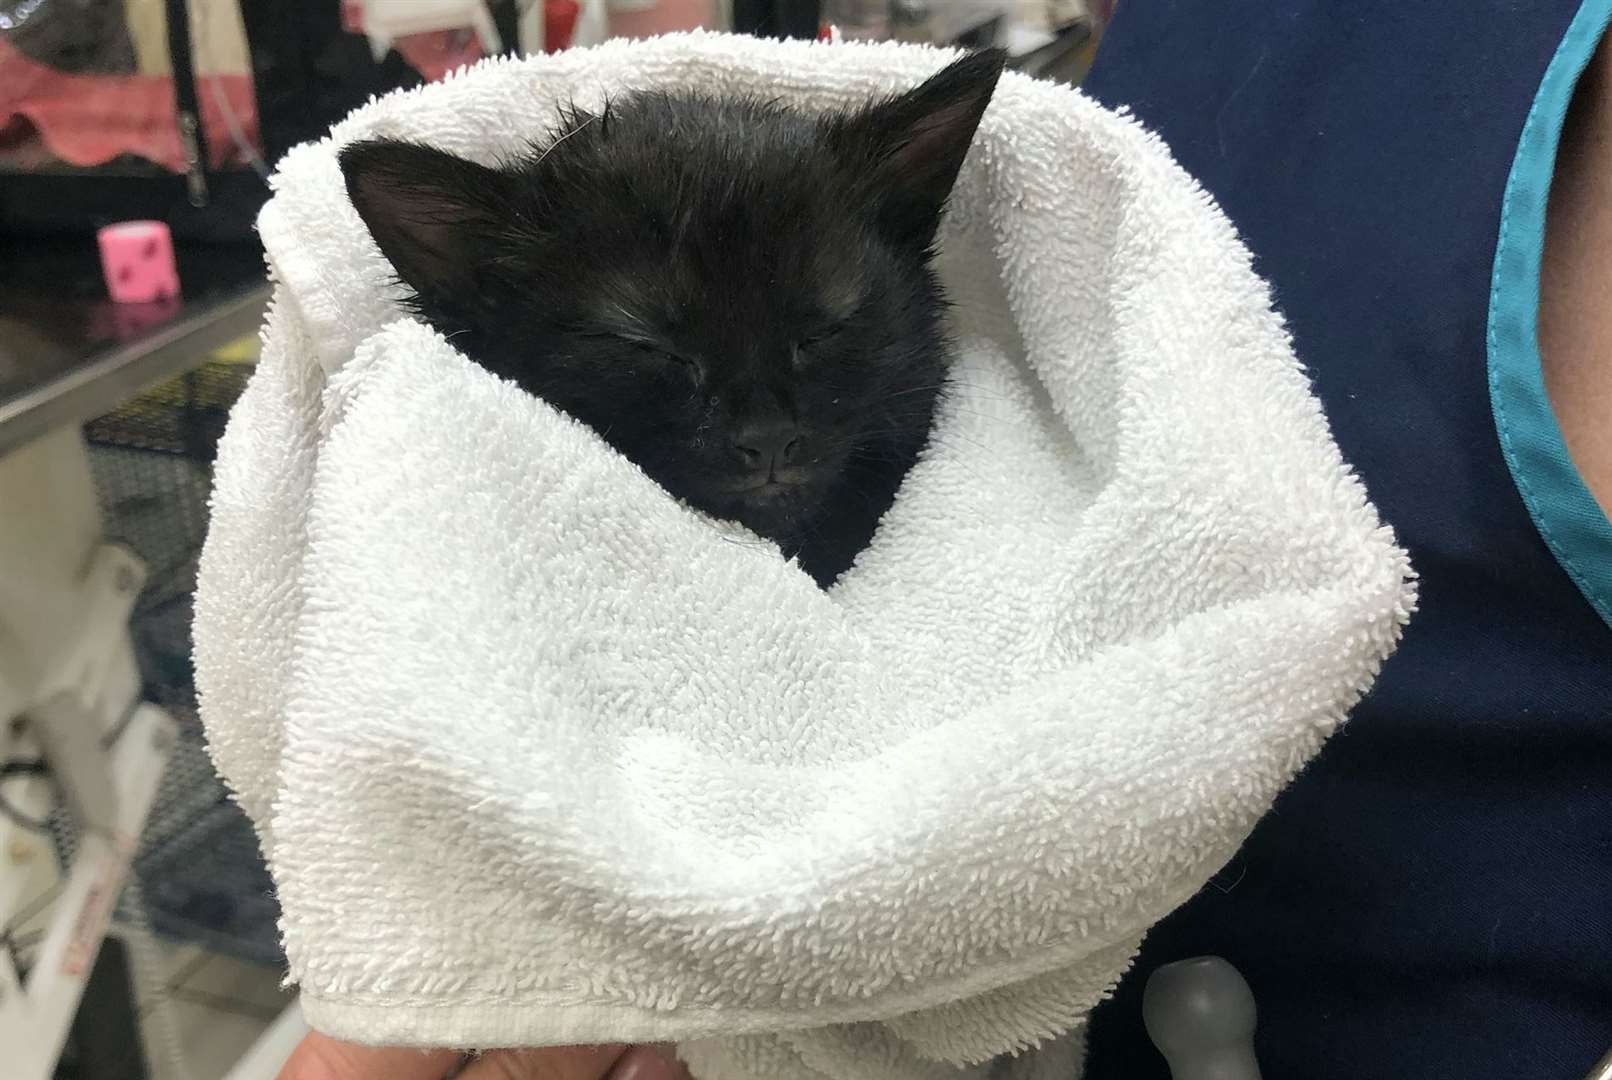 The five-week-old kittenm after being removed from the toy. Picture: SWNS